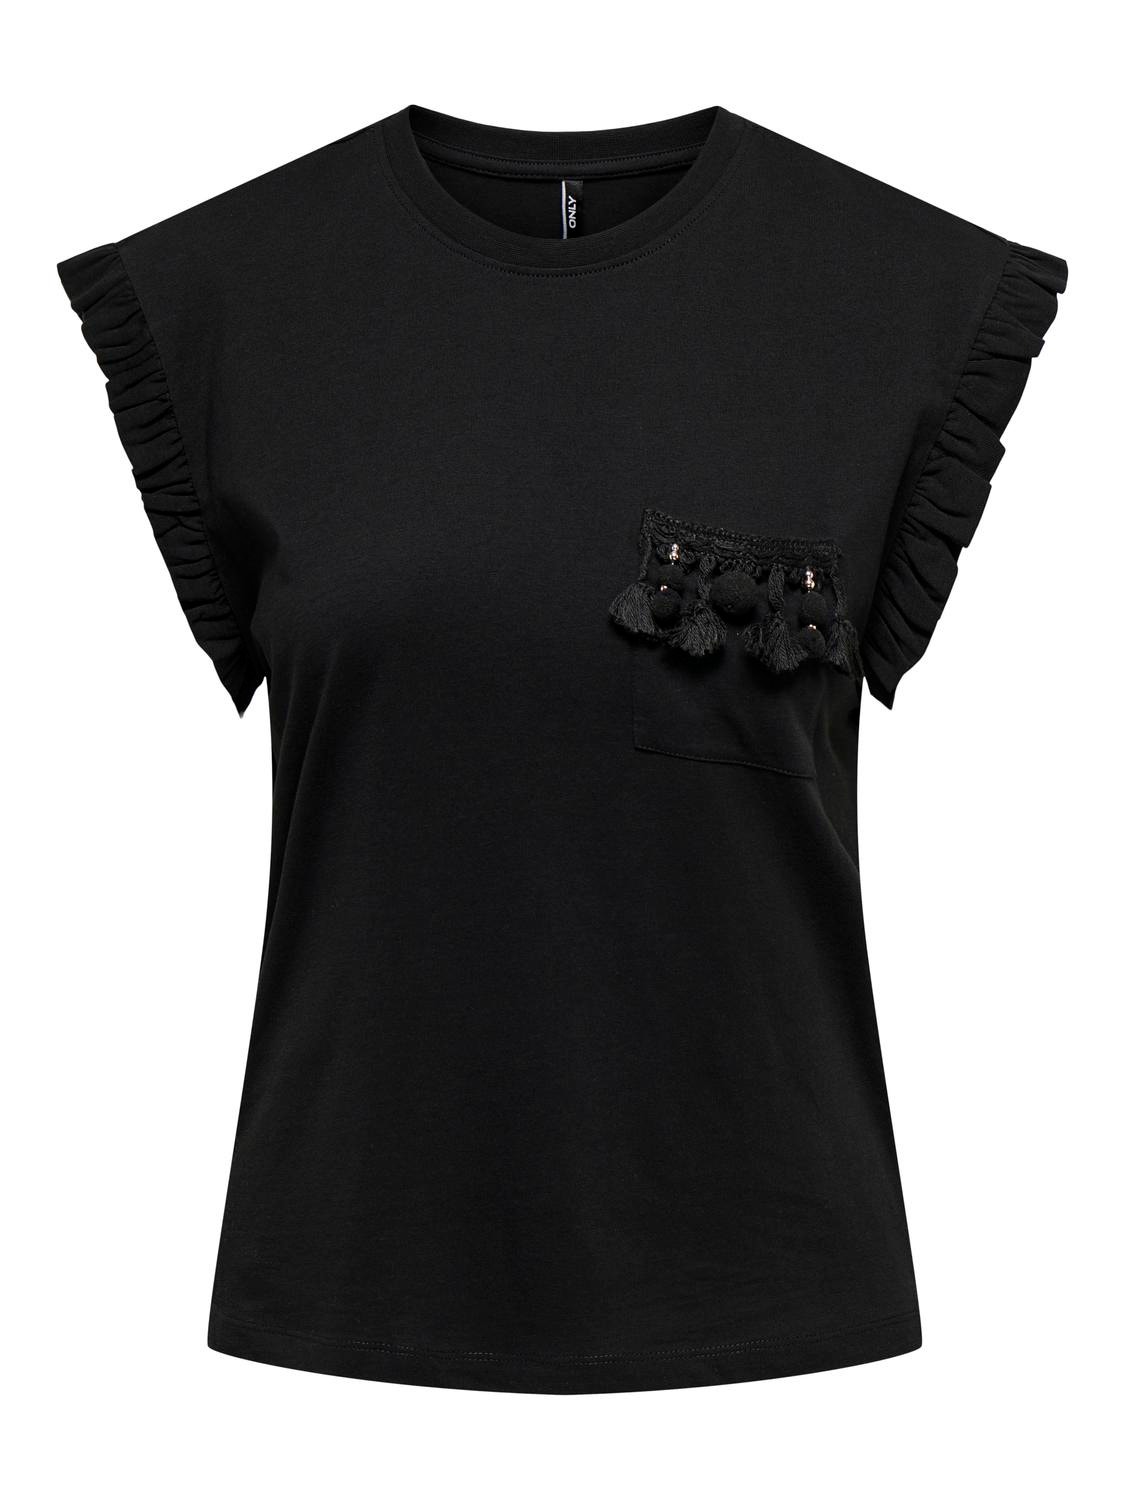 ONLY Frill Top -Black - 15289732